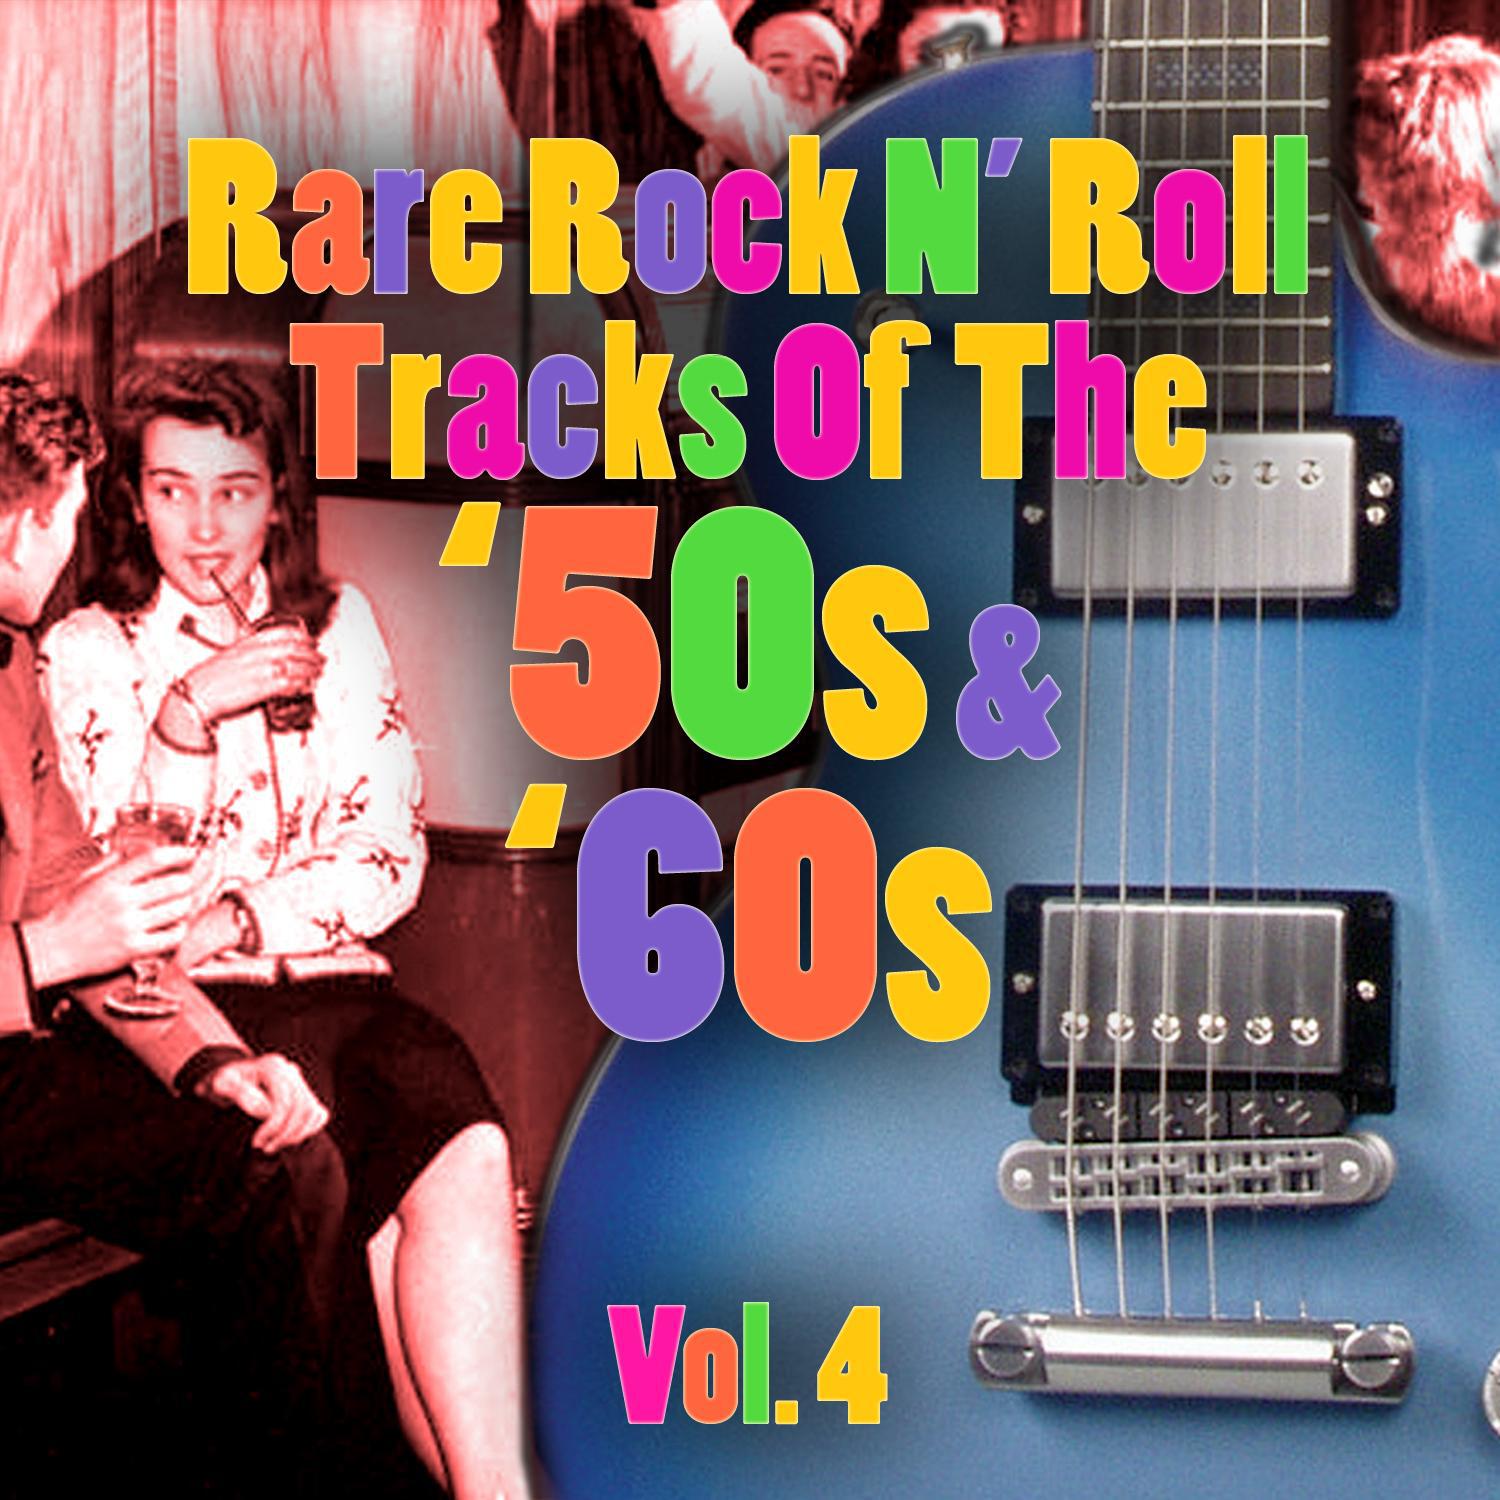 Rare Rock N' Roll Tracks Of The '50s & '60s Vol. 4